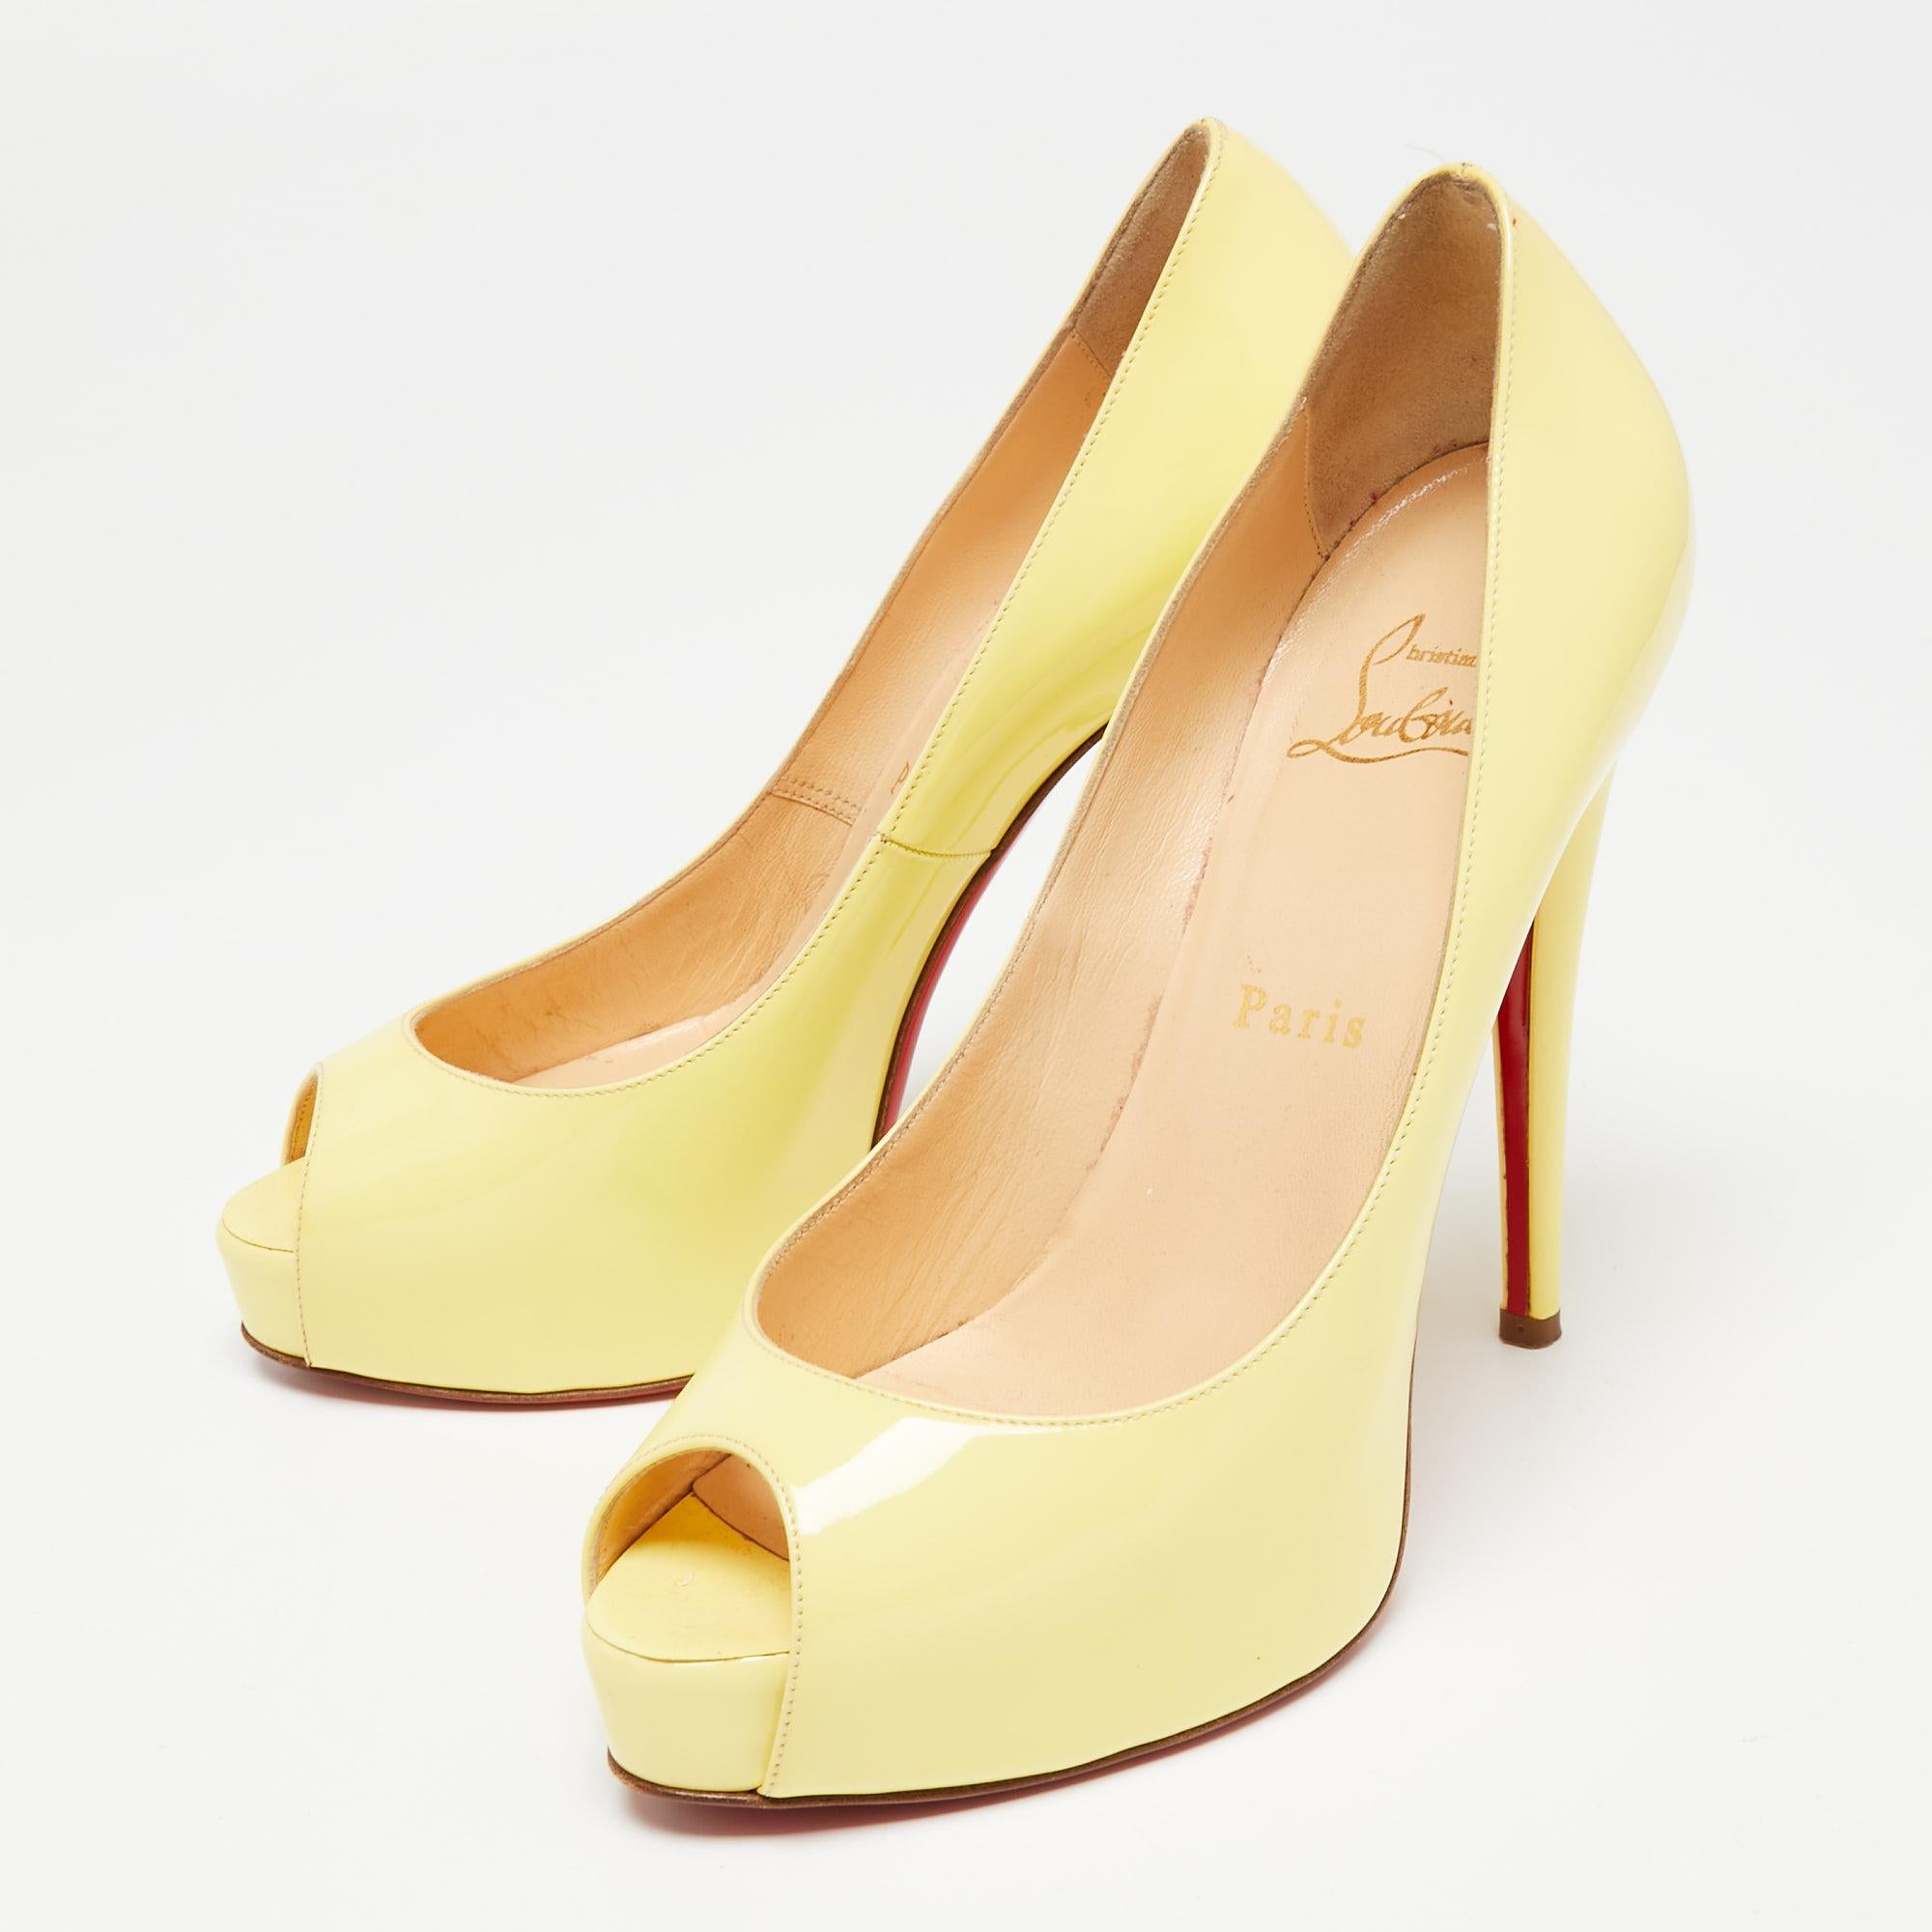 This pair of Christian Louboutin pumps is a timeless classic. Step out in style while flaunting these patent leather shoes, ideal for all occasions. They feature peep toes, platforms and 12.5 cm heels.

Includes: Original Dustbag, Extra Heel tips